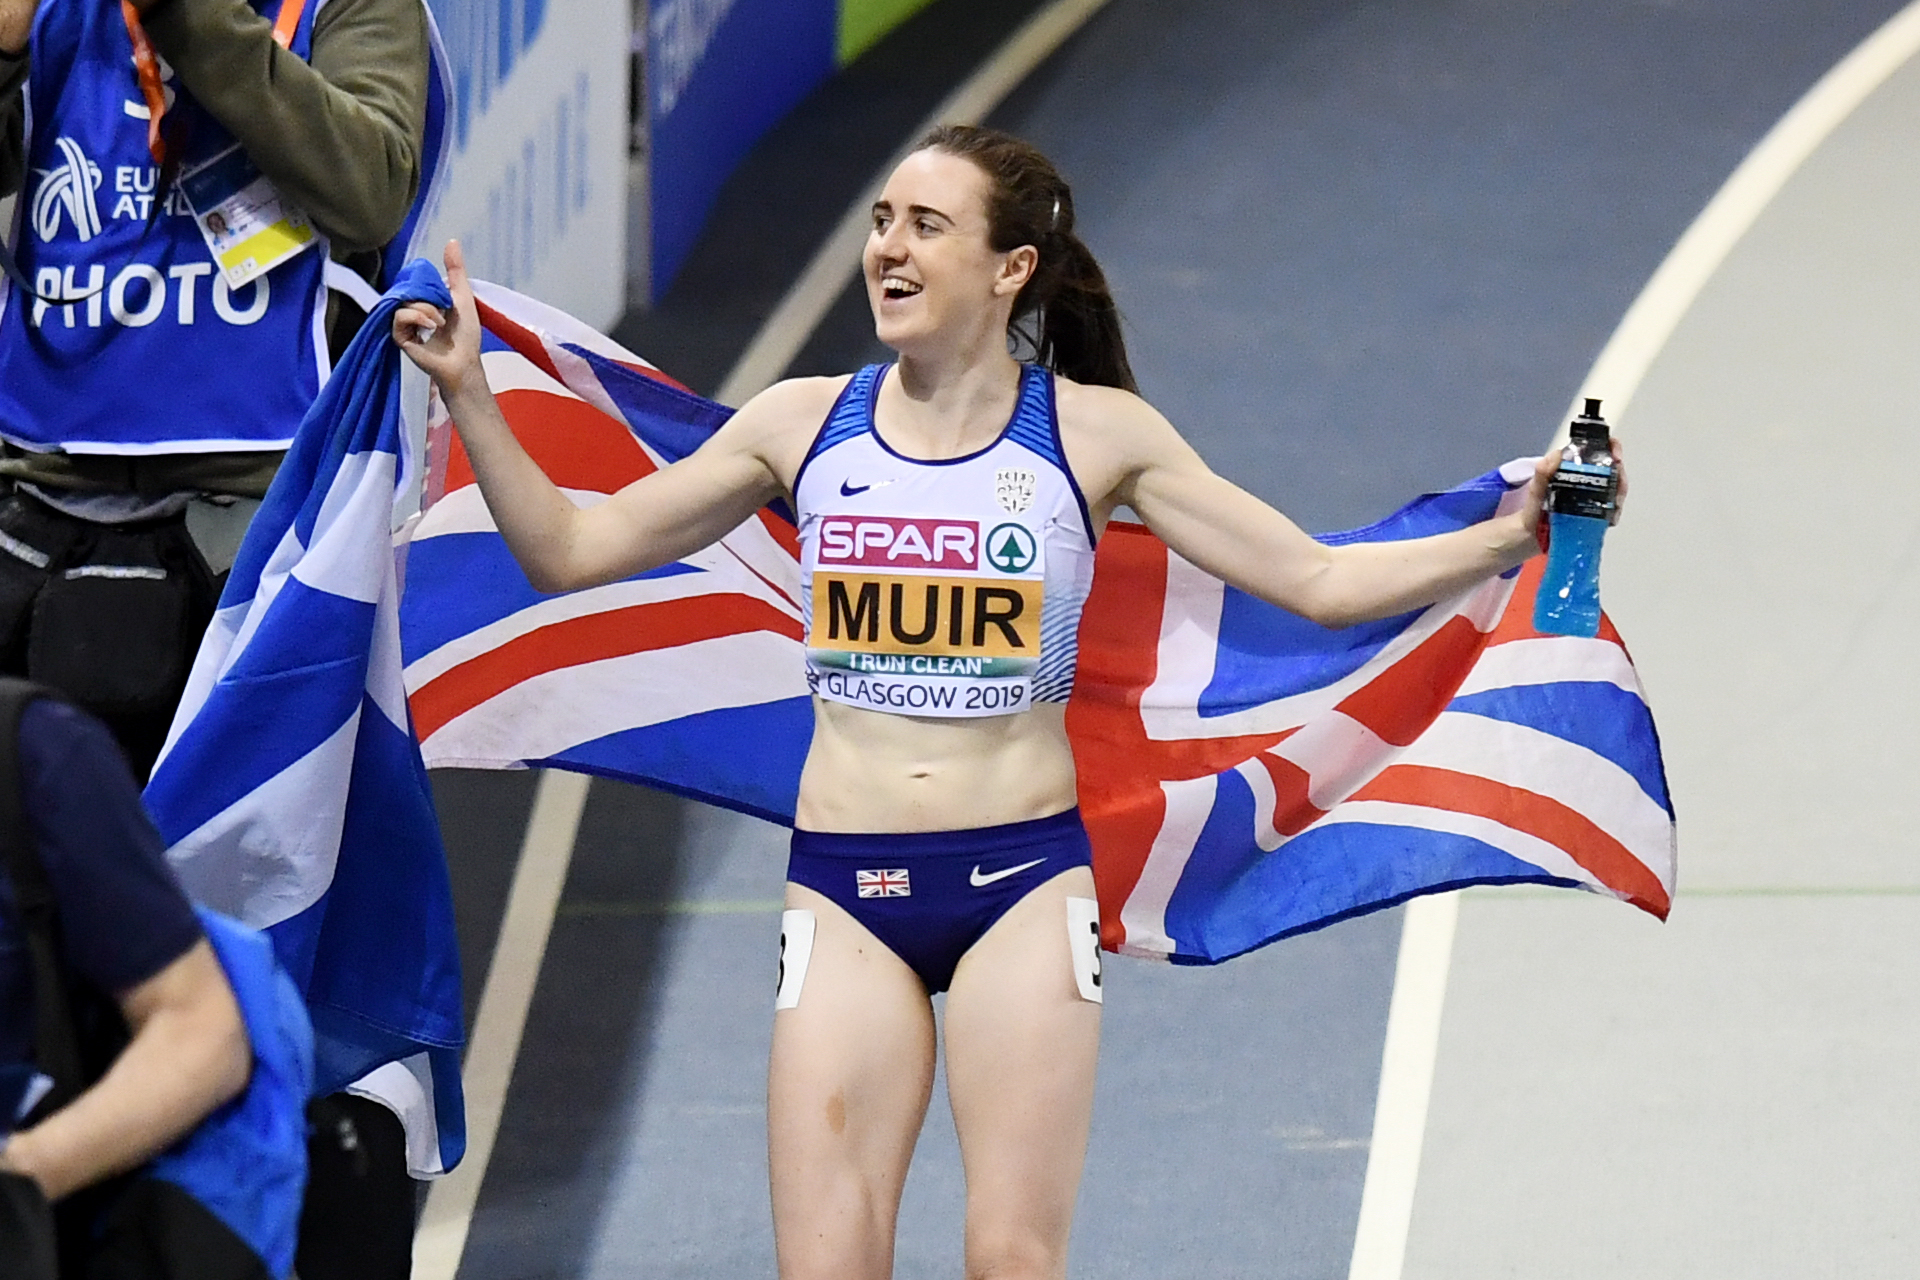 Laura Muir is in fine form as she bids for another record